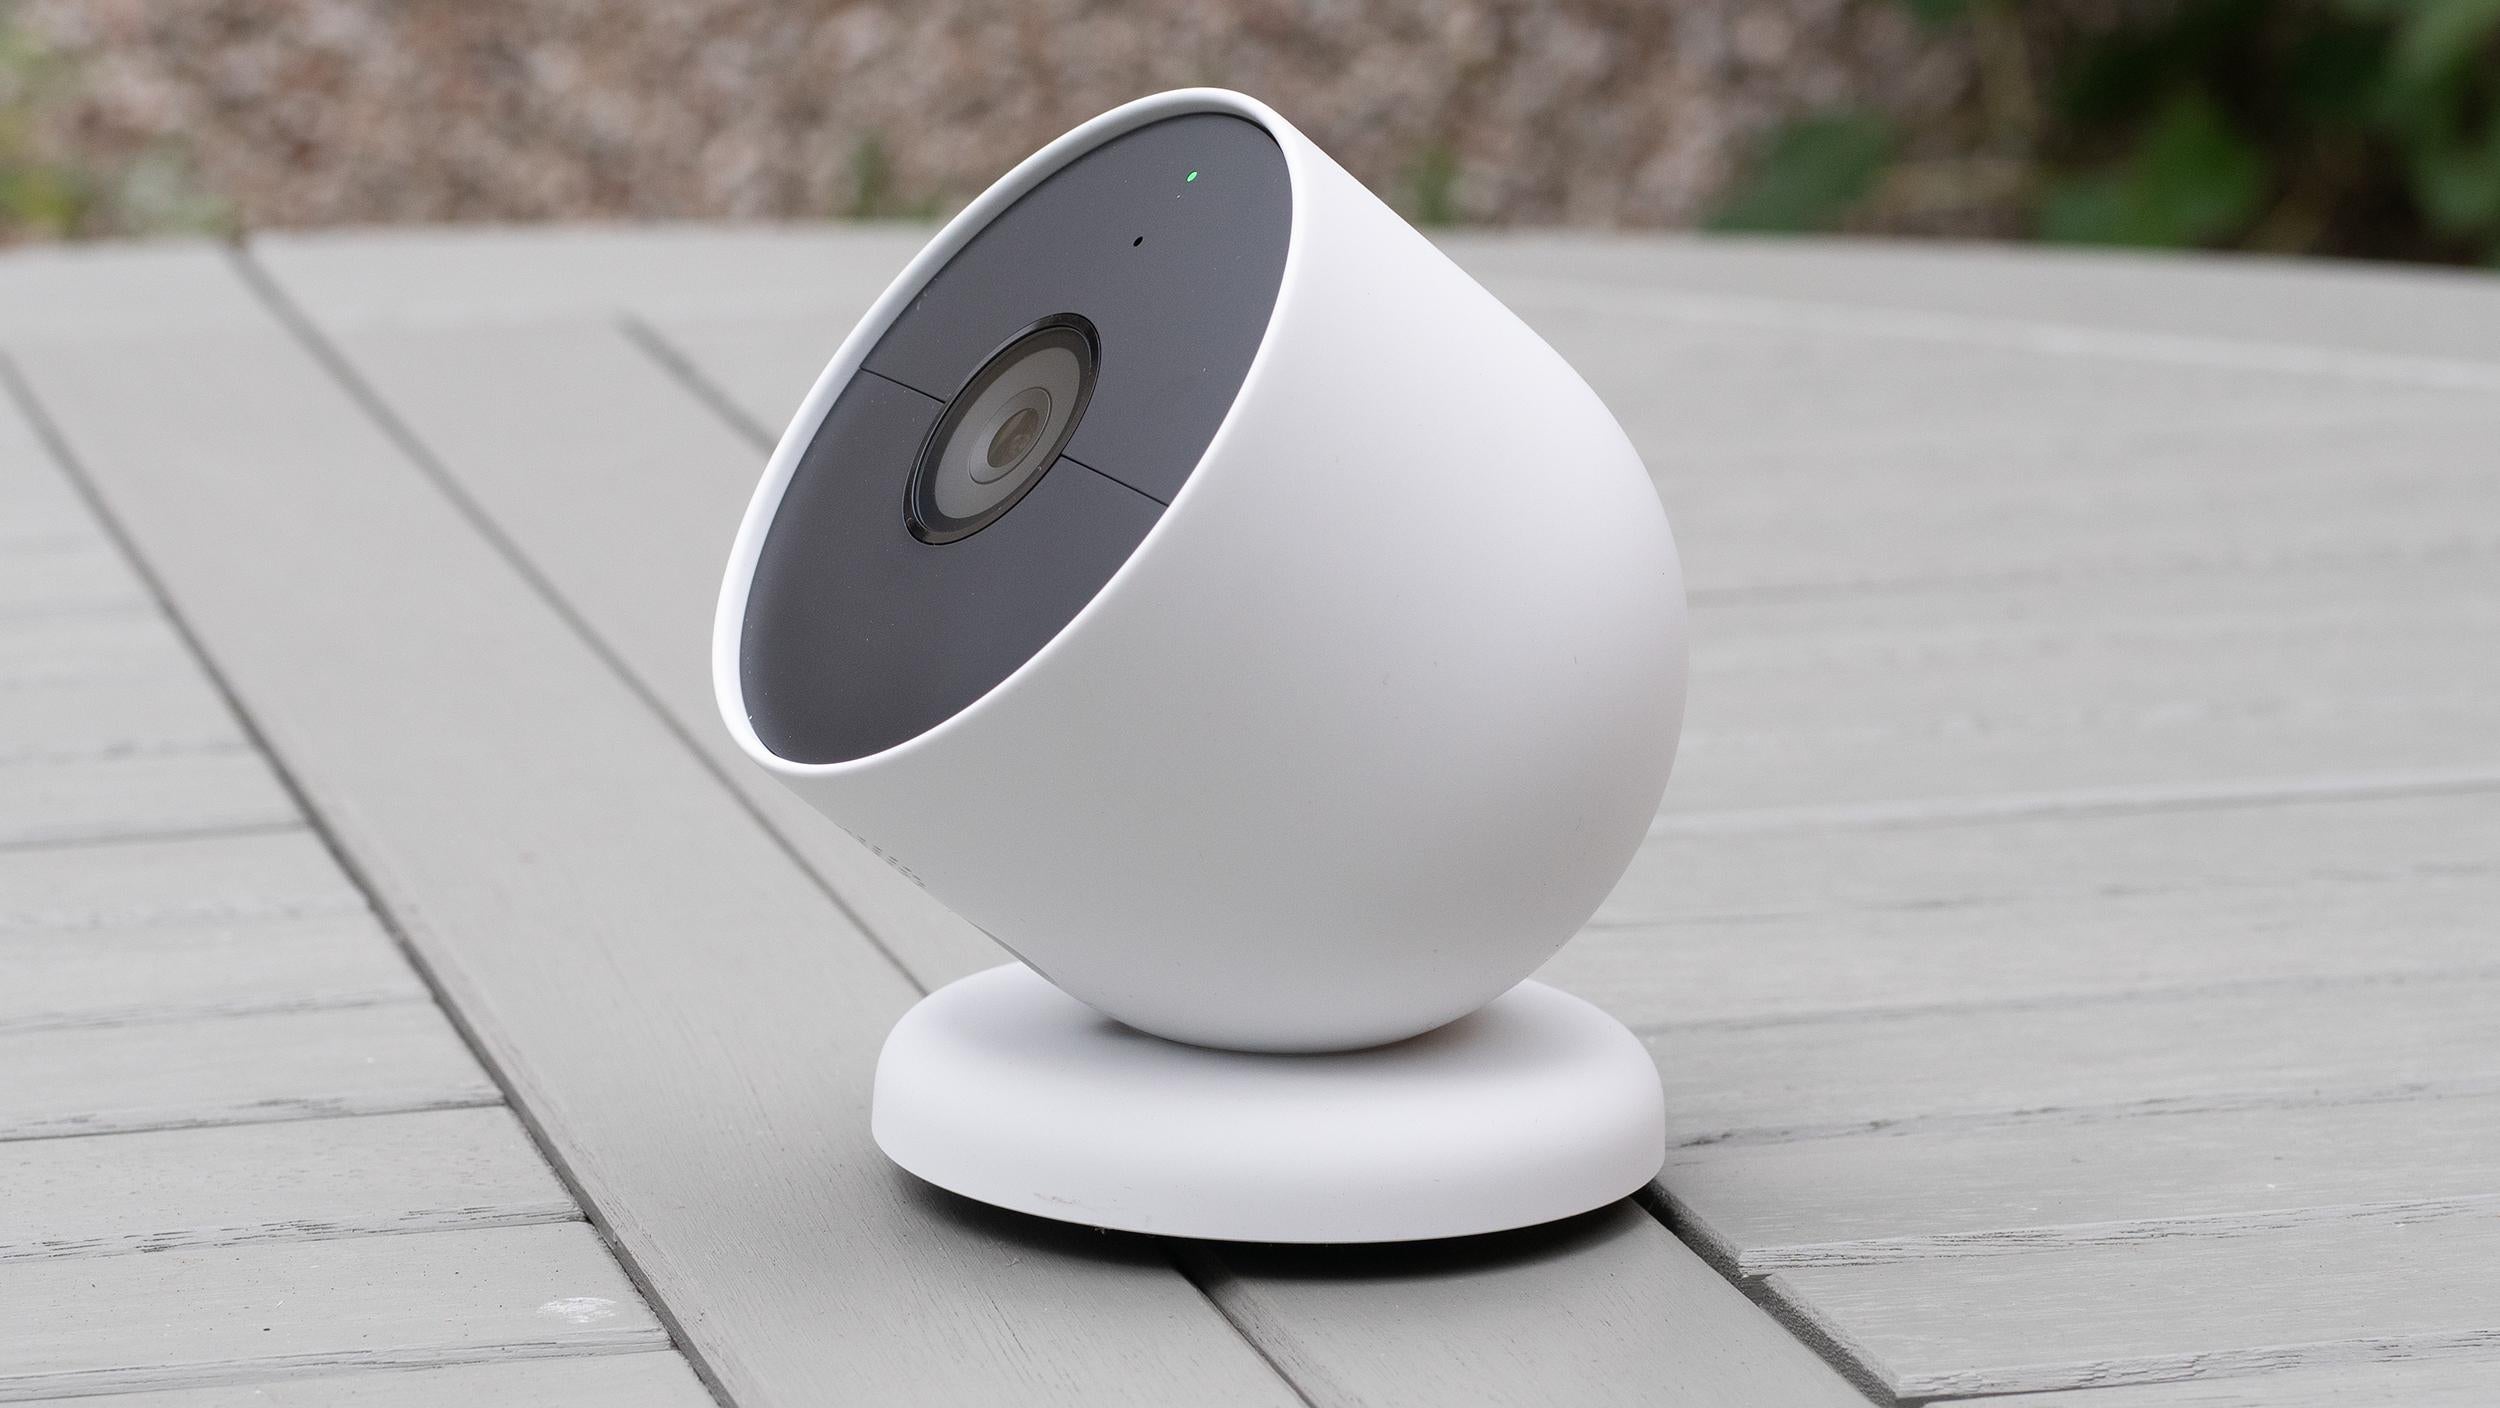 What GHz Do Nest Outdoor Cameras Use?